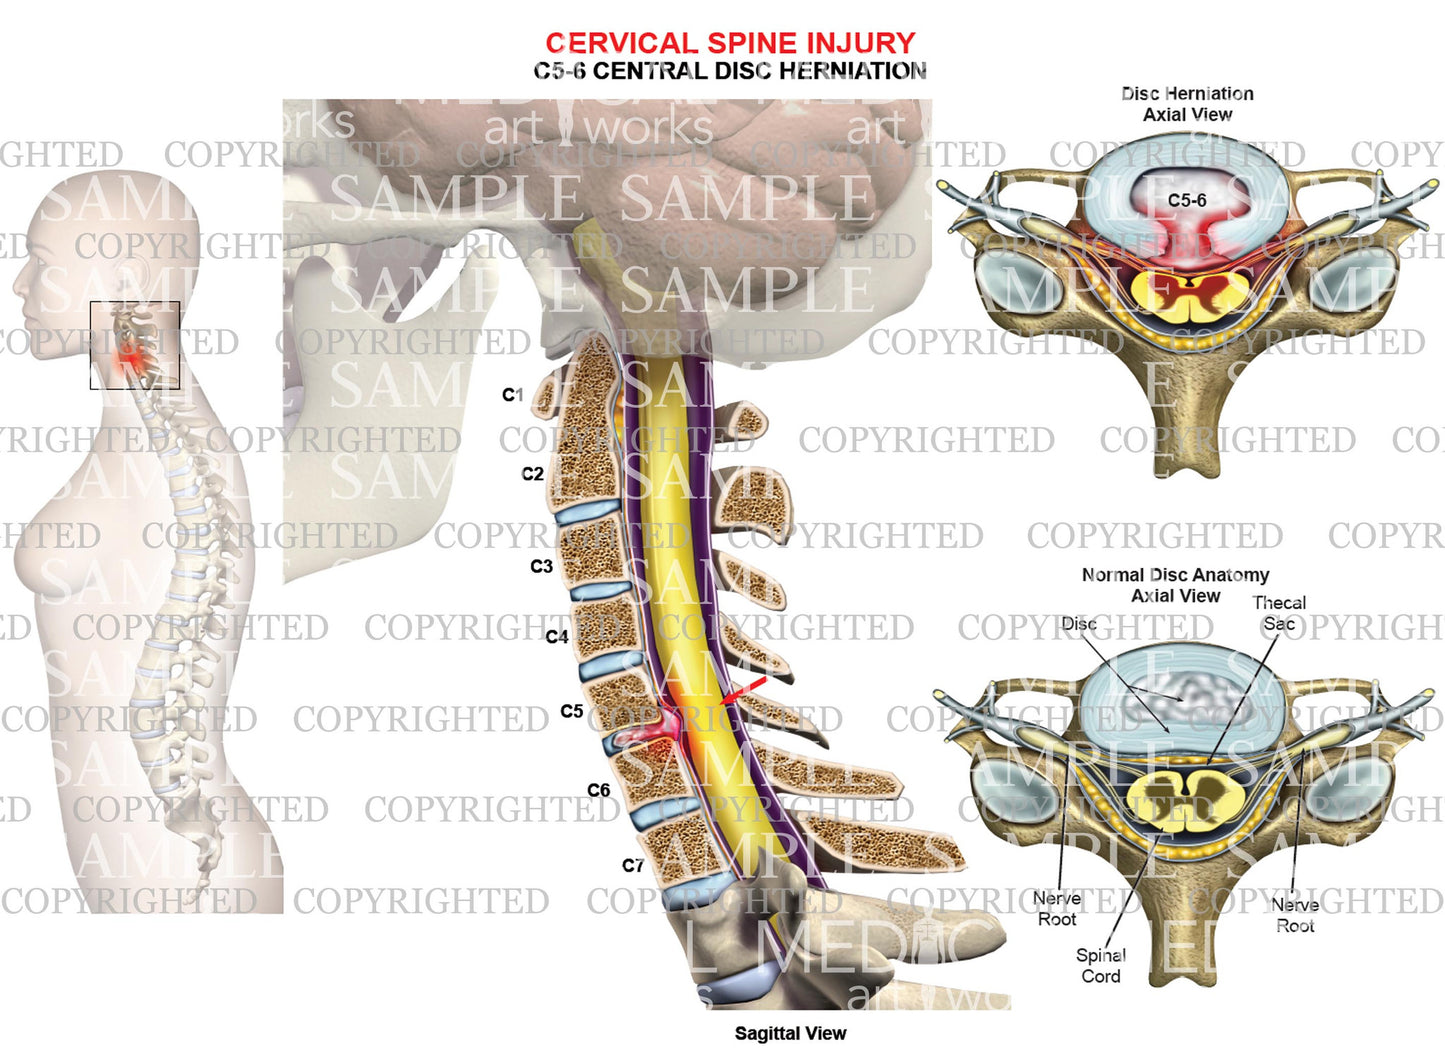 C5-6 disc herniation - central